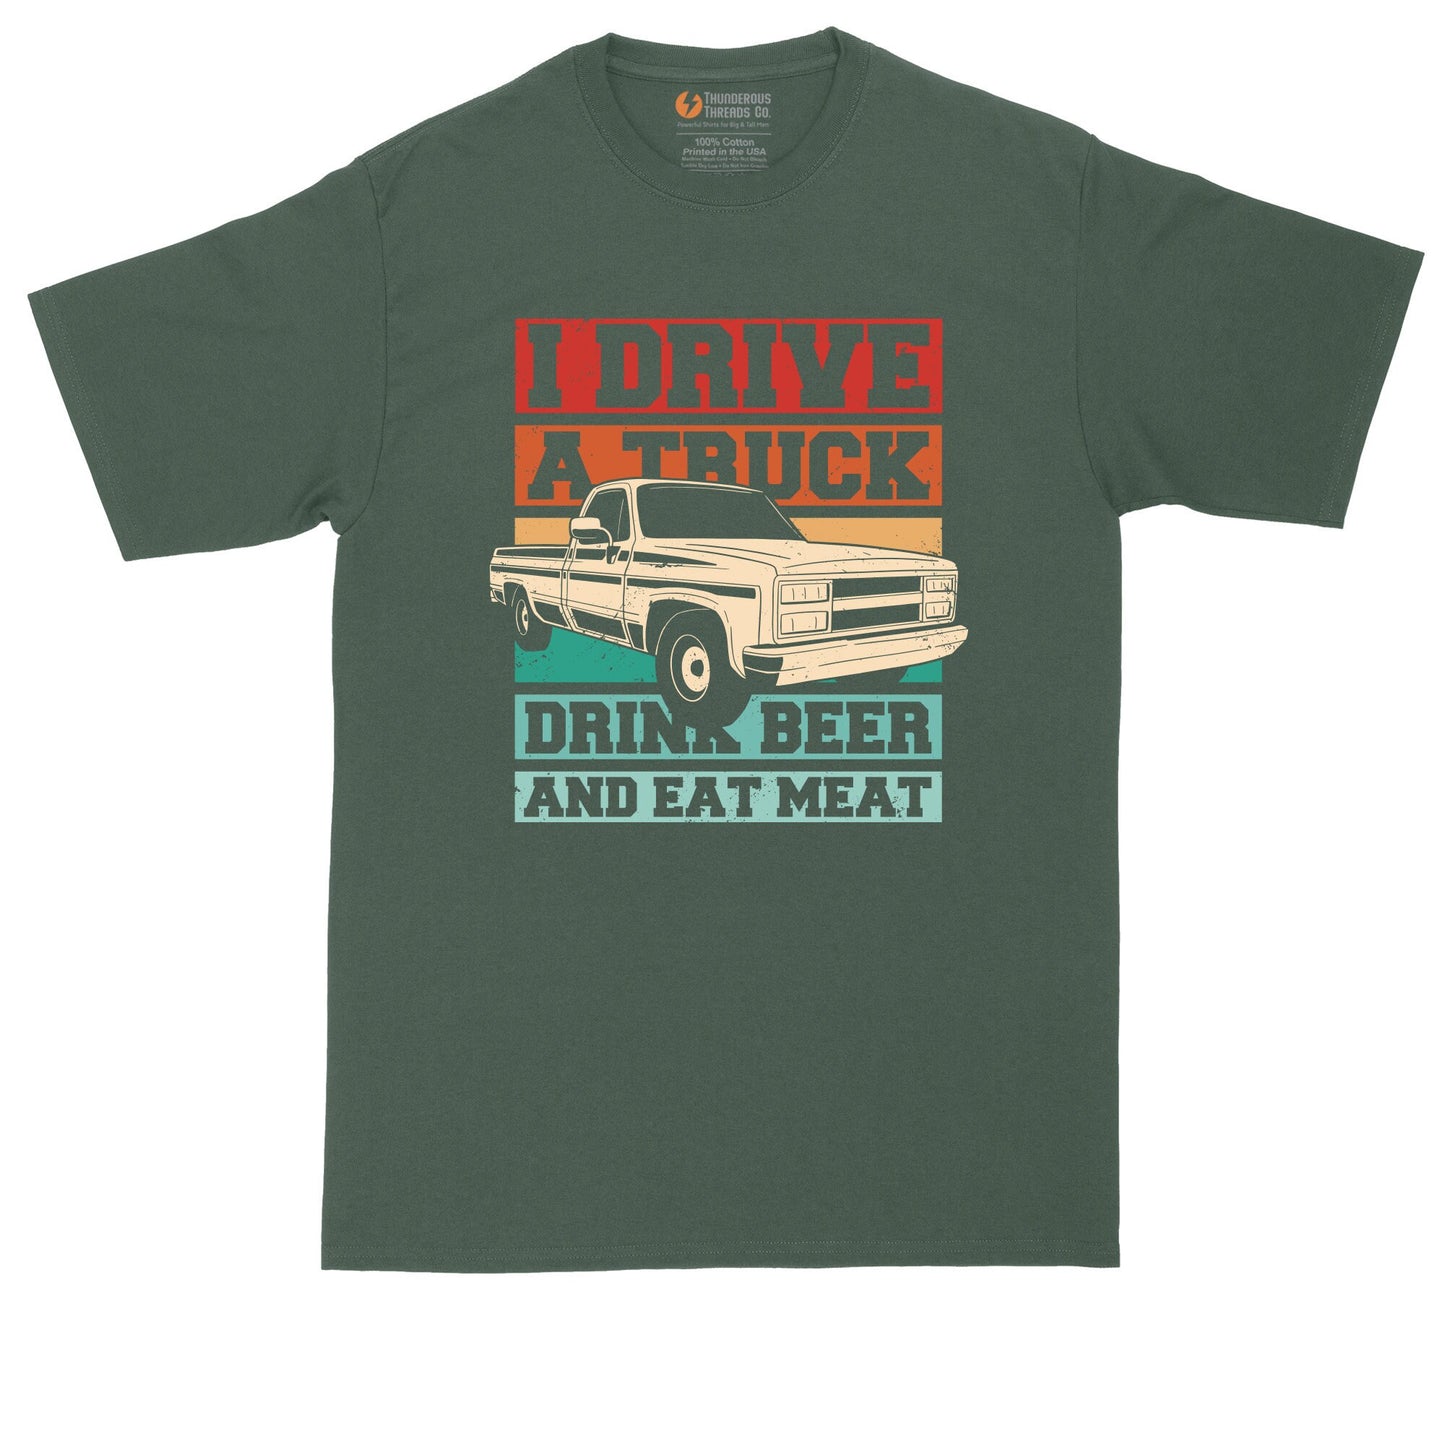 I Drive a Truck Drink Beer and Eat Meat | Funny Shirt | Redneck Shirt | Meat Smoking Shirt | Mens Big and Tall T-Shirt